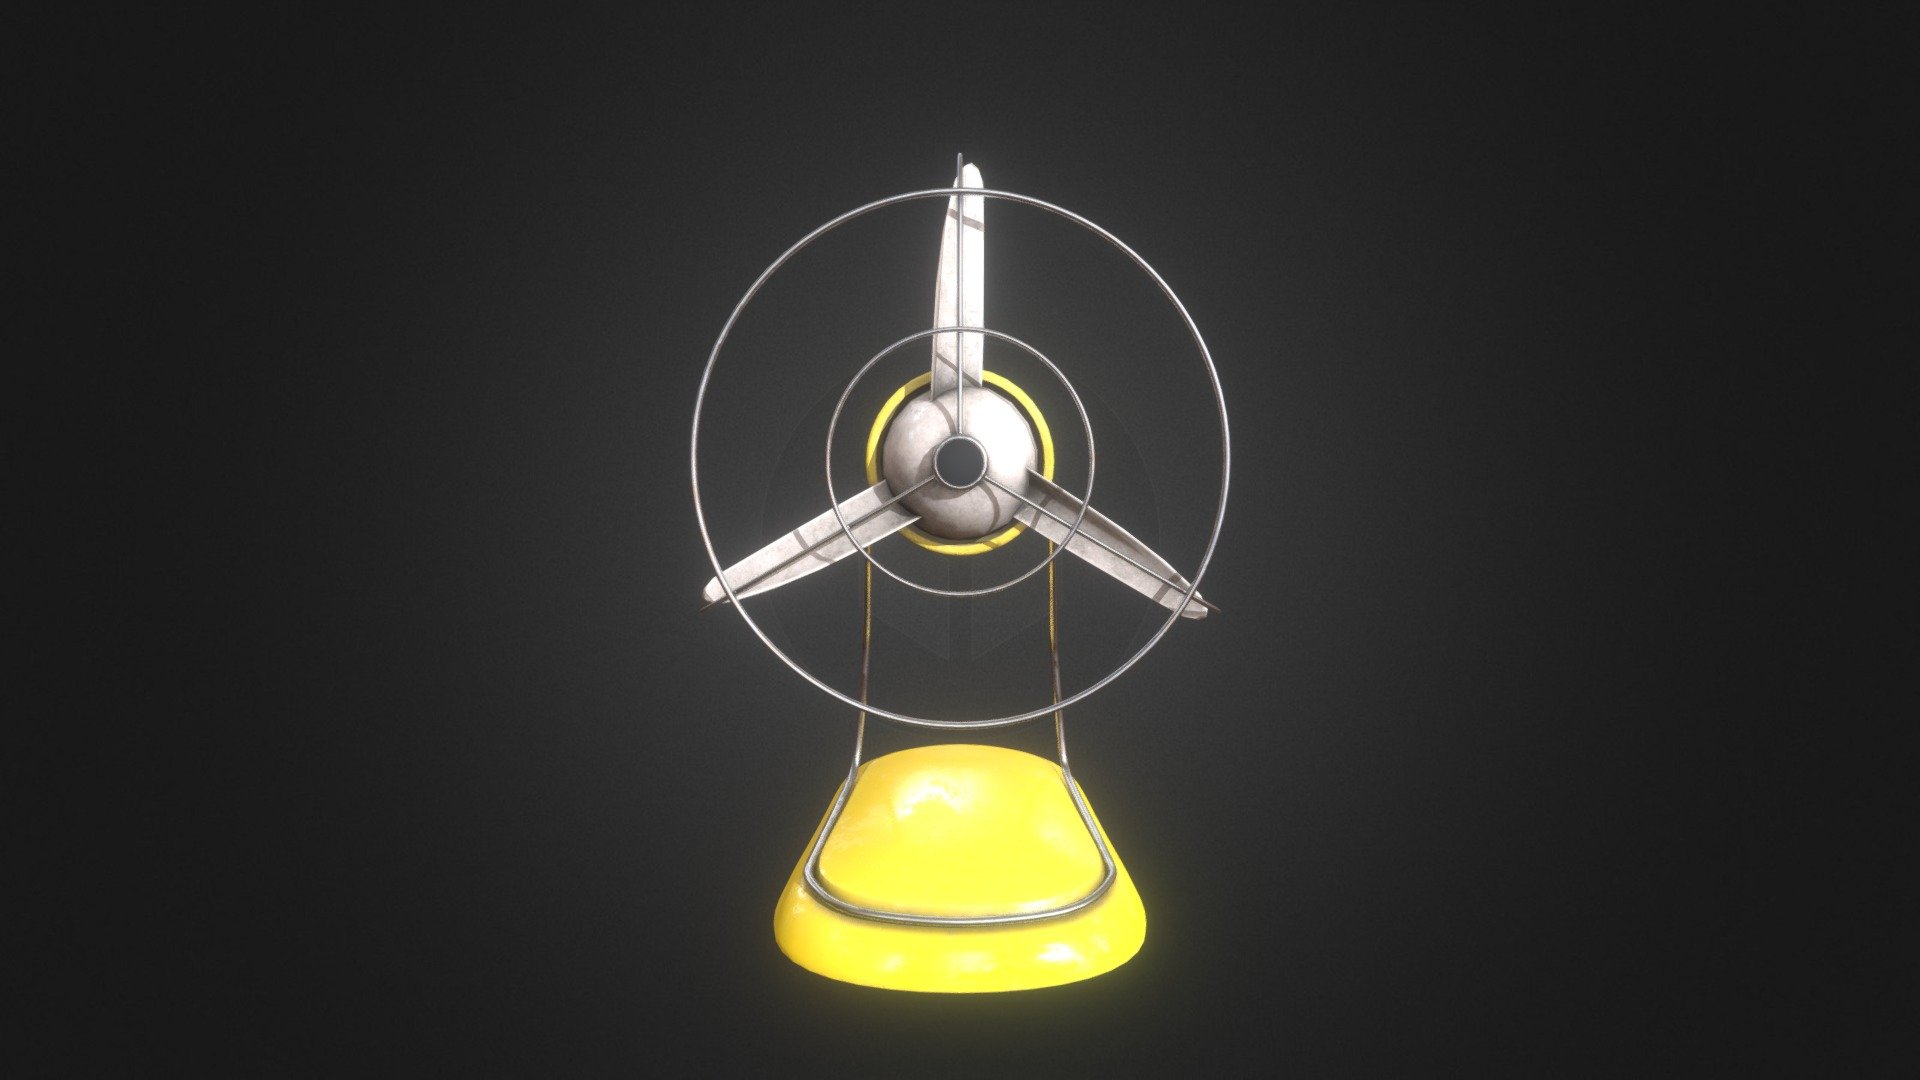 Electric Fan inspired by a Pifco model.

This is part of a set of Mid Century Modern objects I challenged myself to complete in a few days 3d model